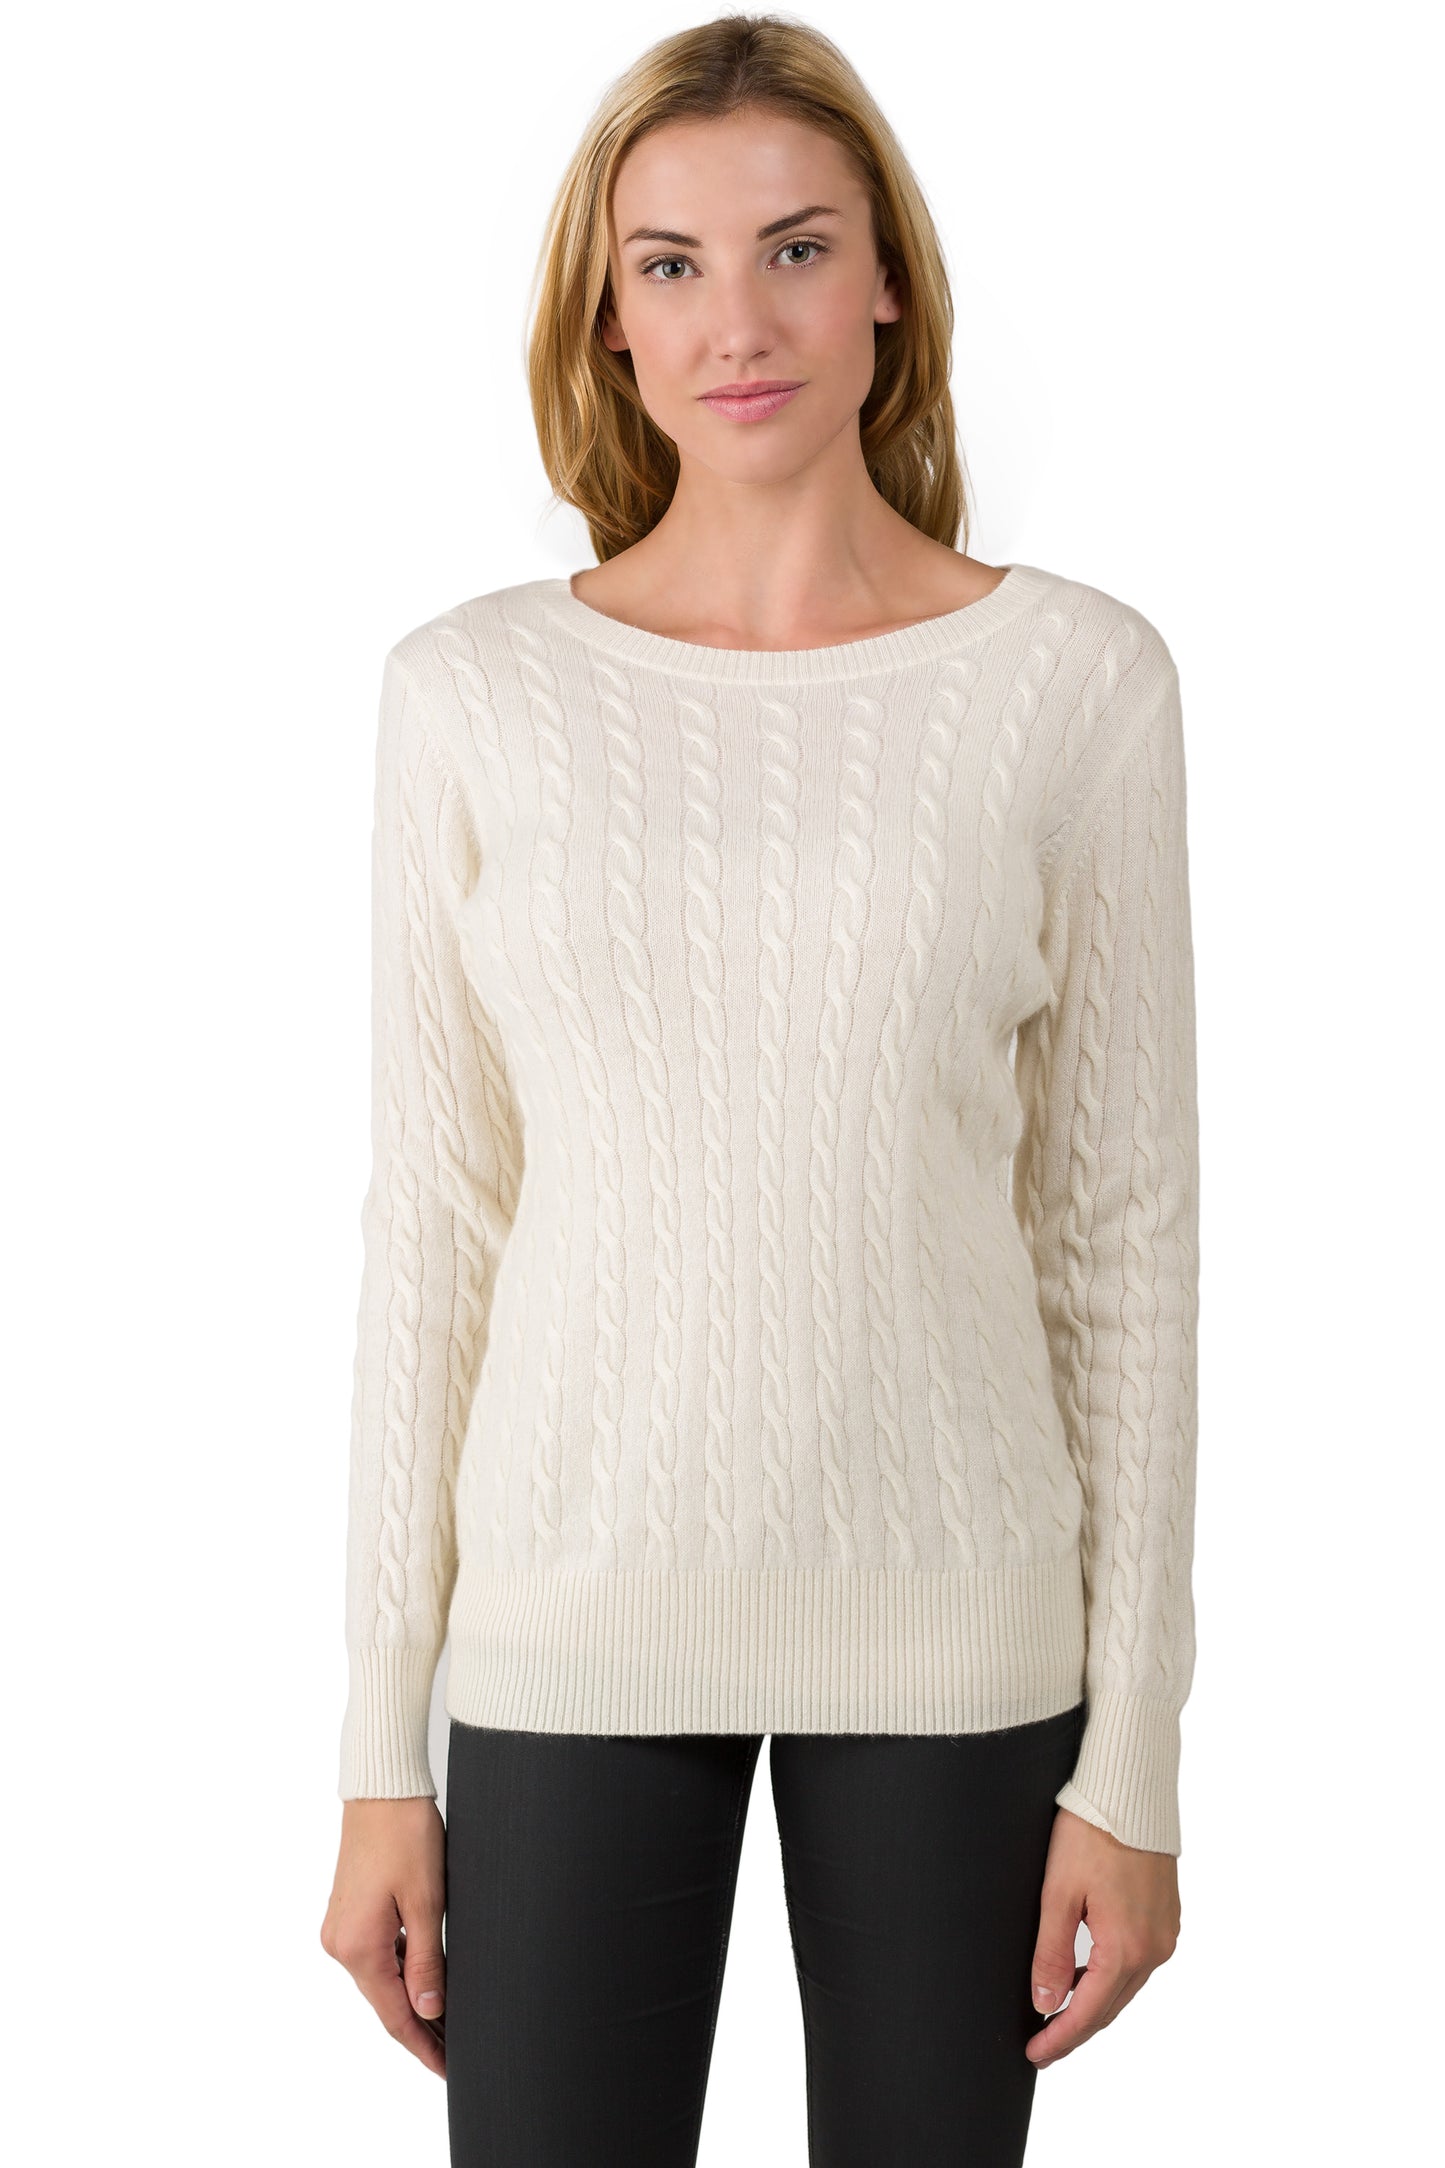 J CASHMERE Women's 100% Cashmere Long Sleeve Cable-knit Pullover Crew Neck Sweater